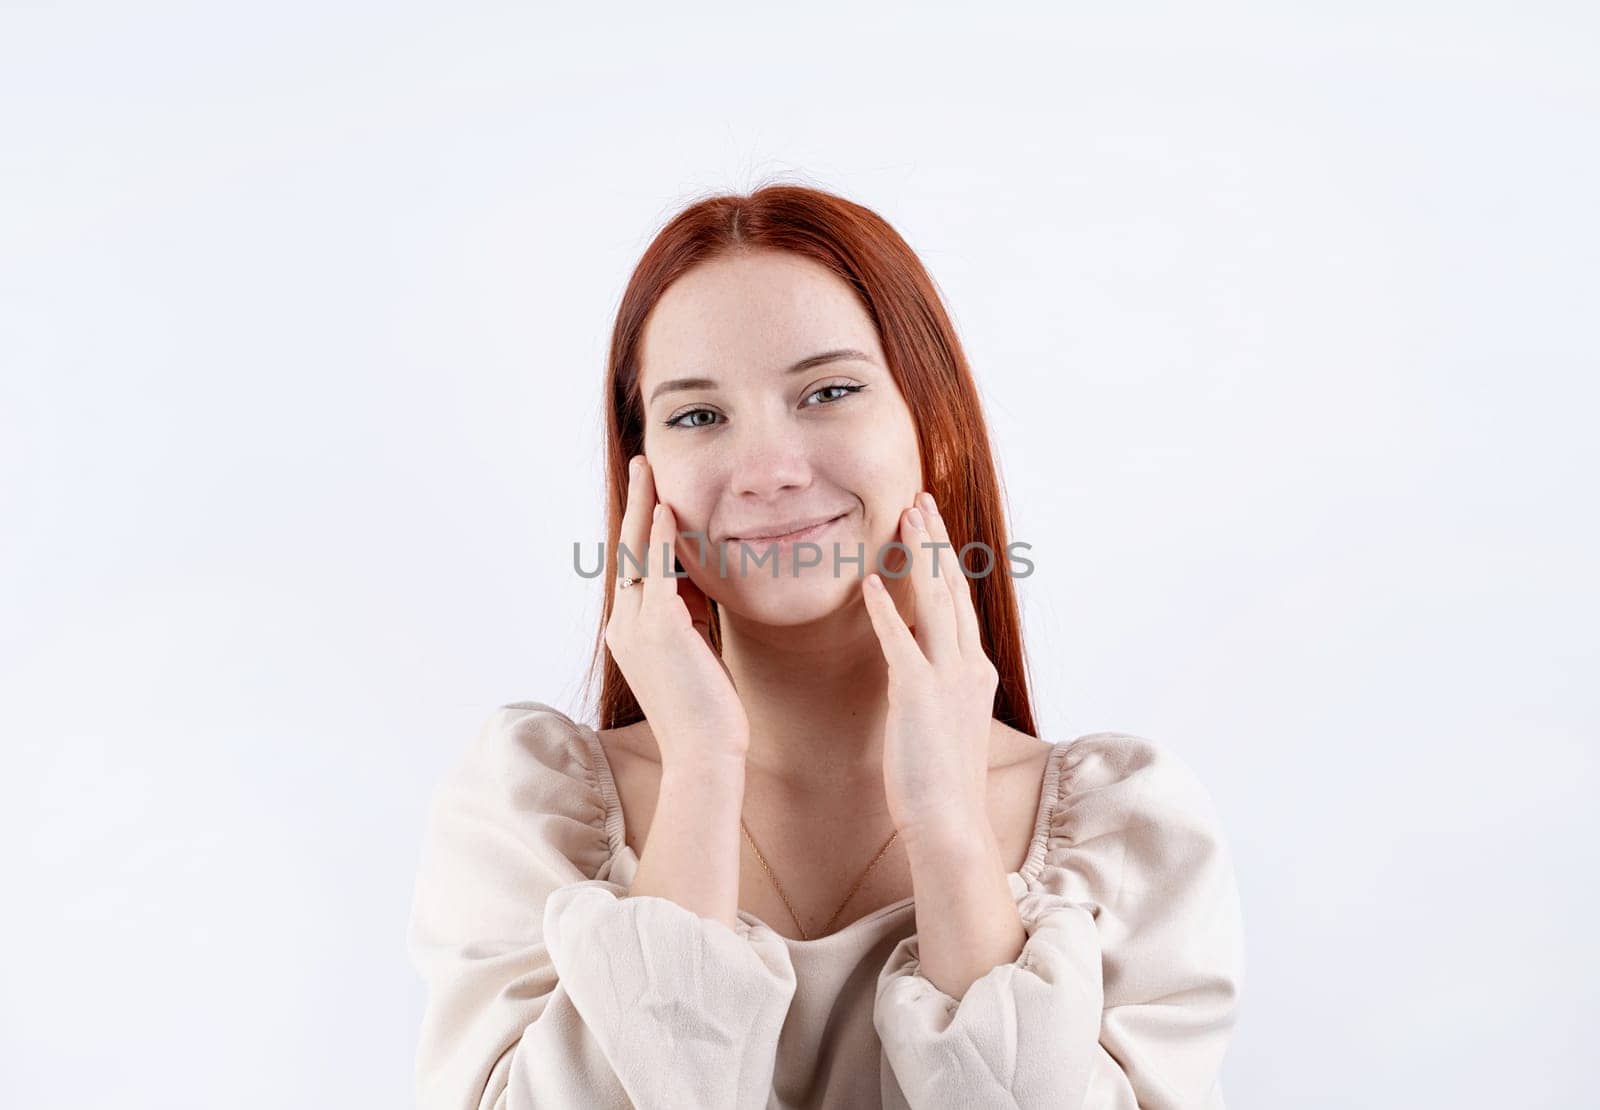 portrait of a young beautiful woman touching her face on white background, copy space by Desperada